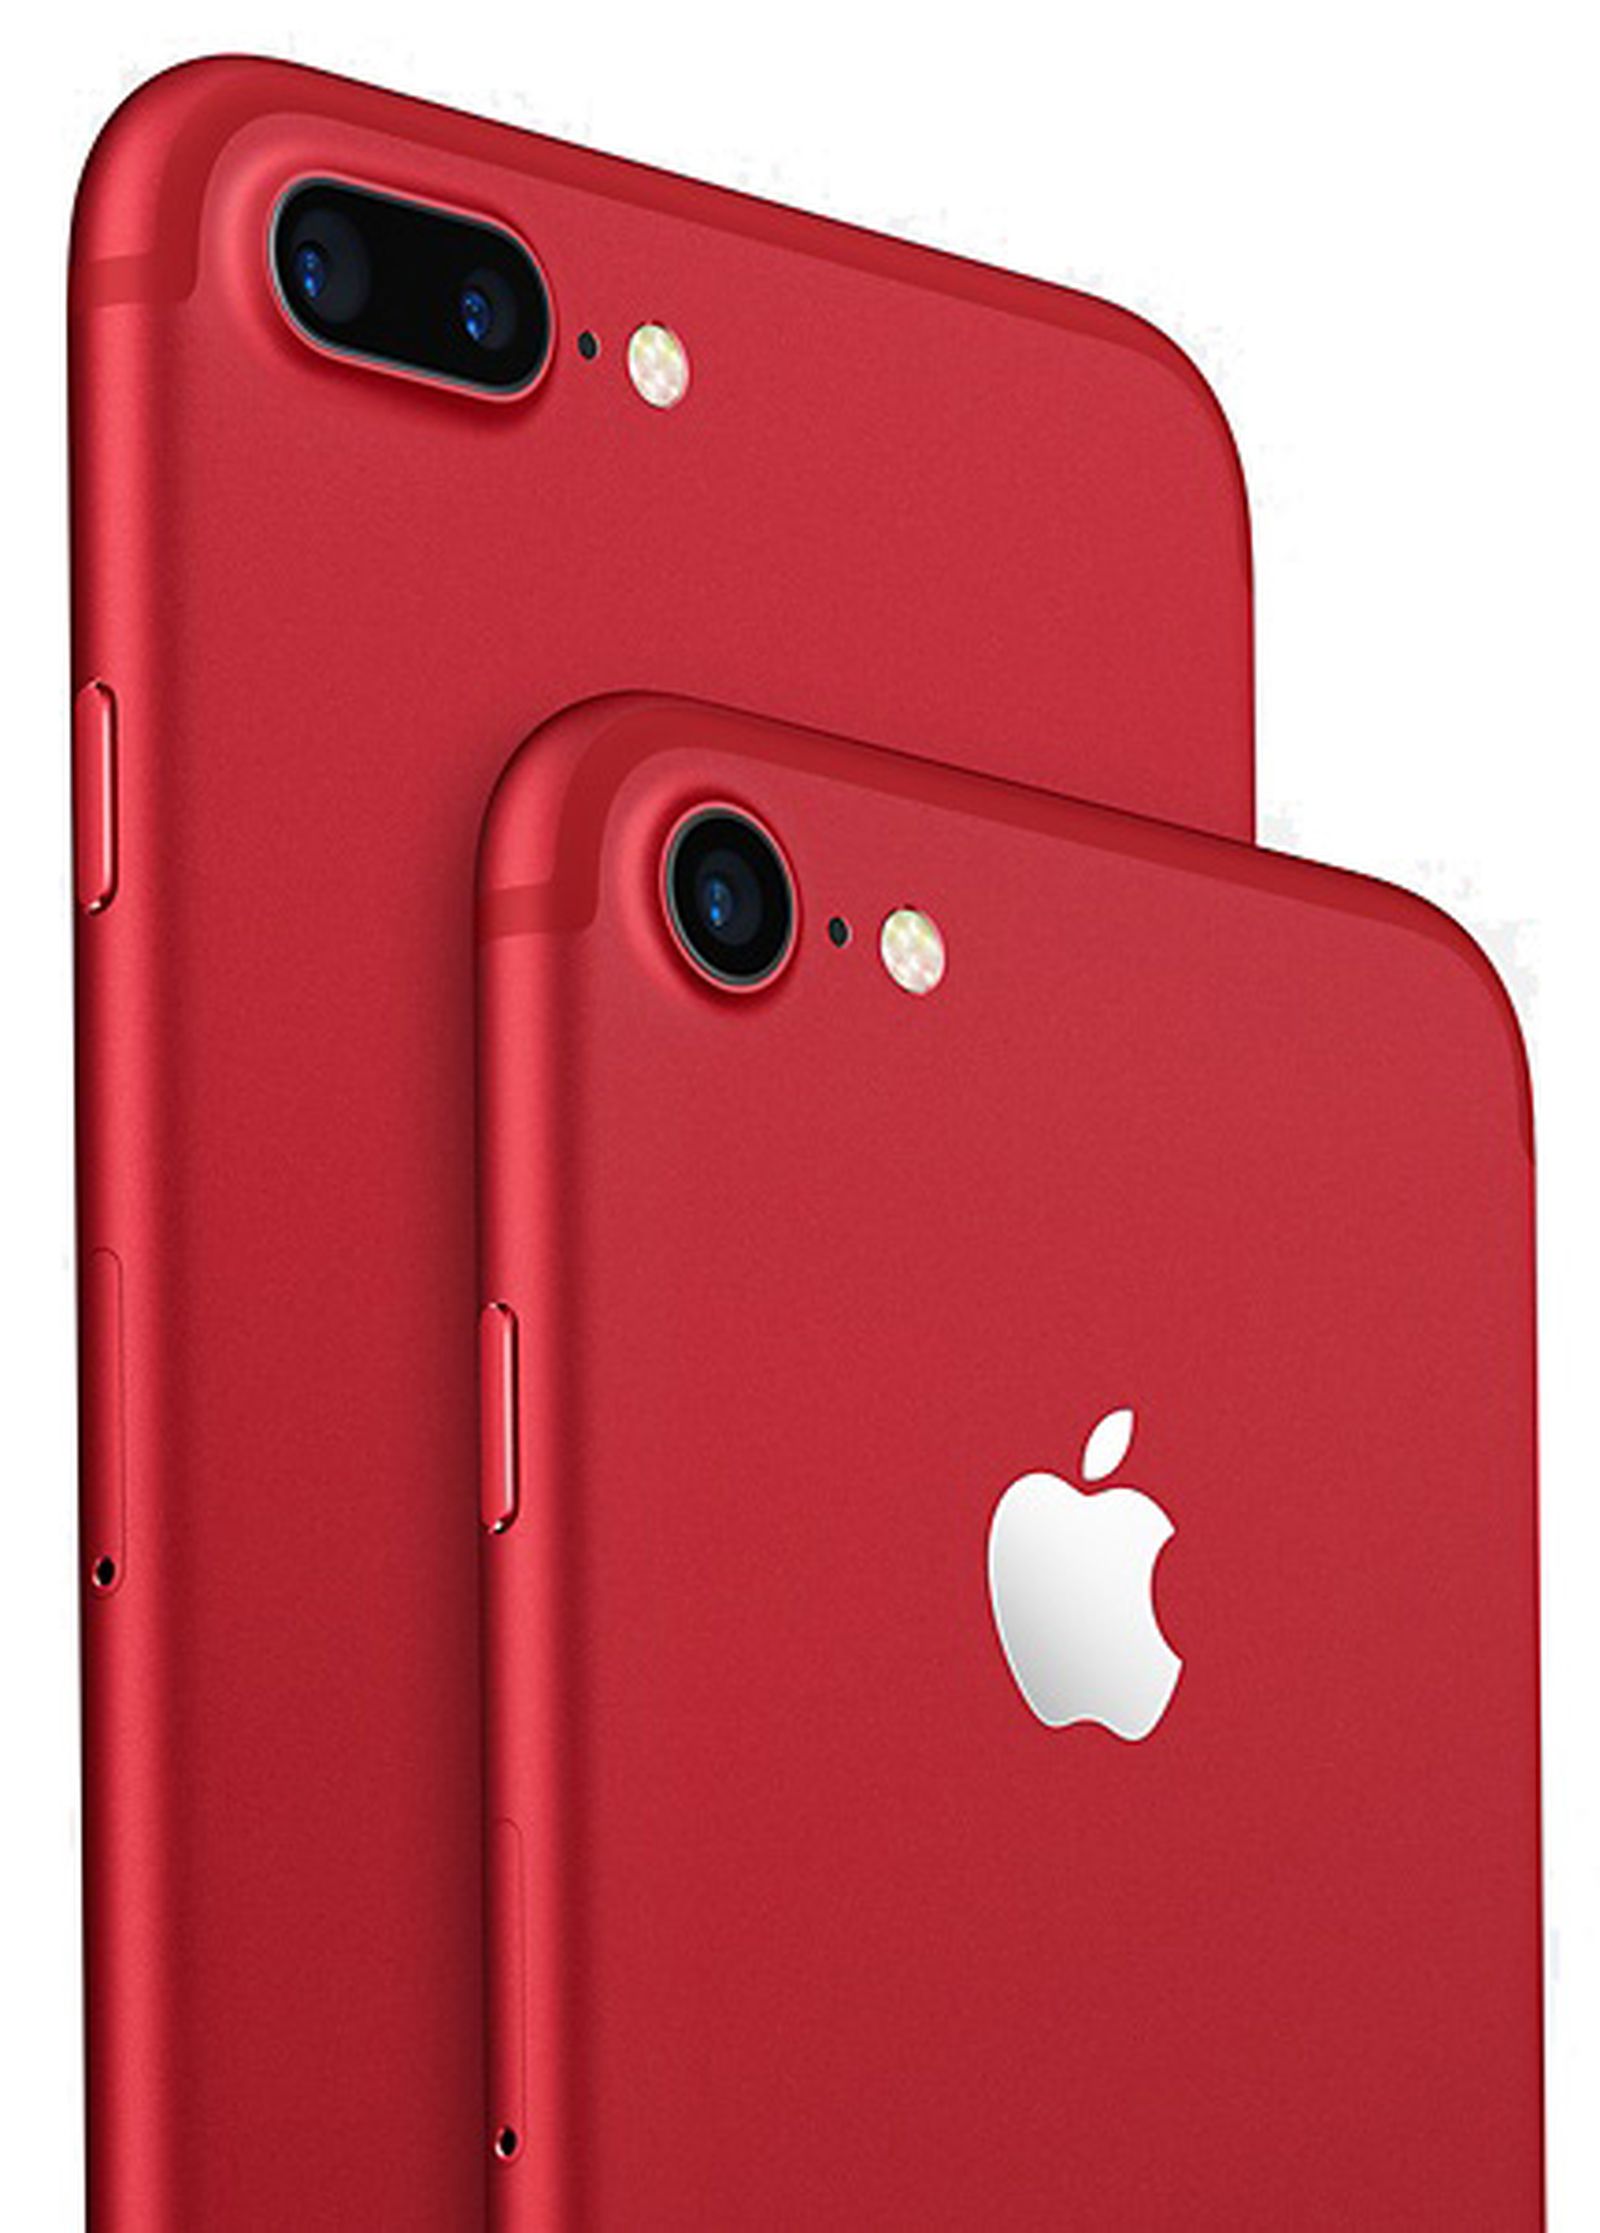 Tim Cook Confirms Apple Will Make Global Fund Donations From Sales Of Red Iphone 7 In China Macrumors